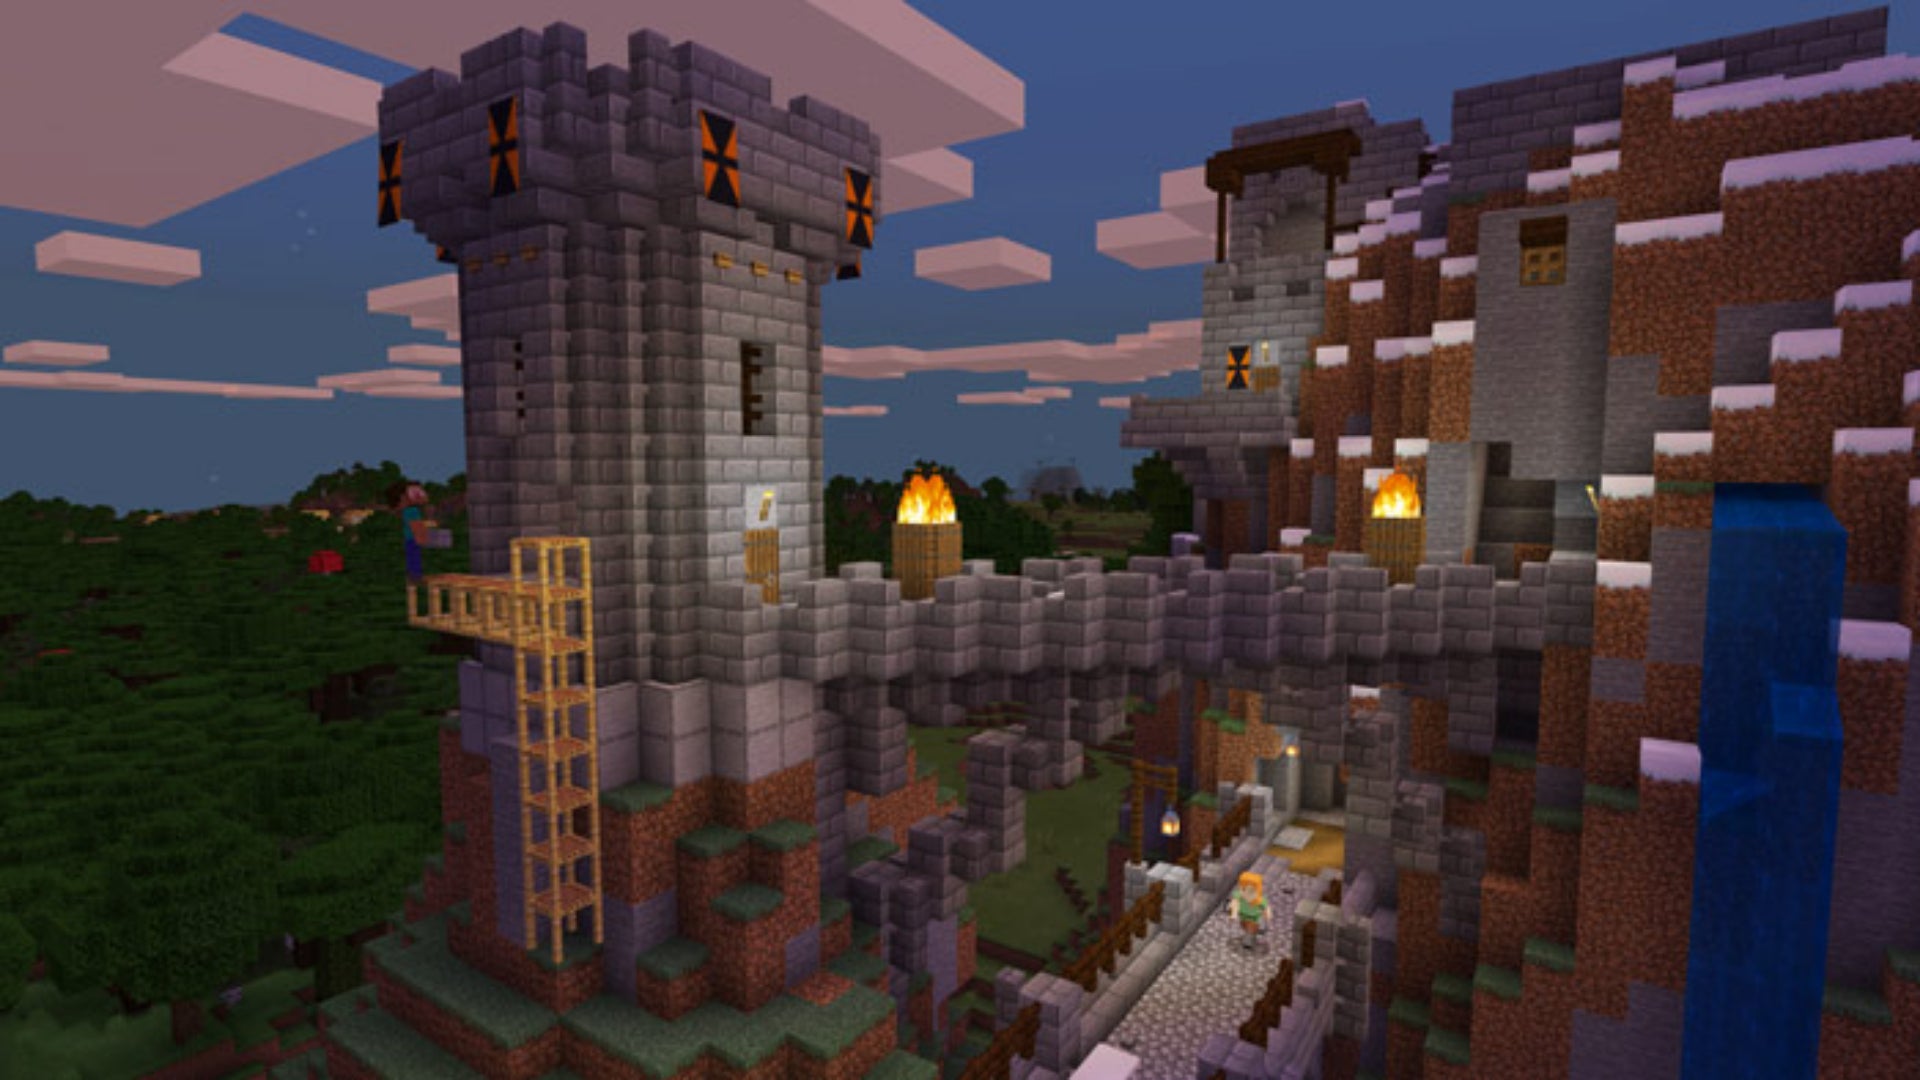 A Minecraft castle built into a cliff with cobblestone is shown, the sun is setting.